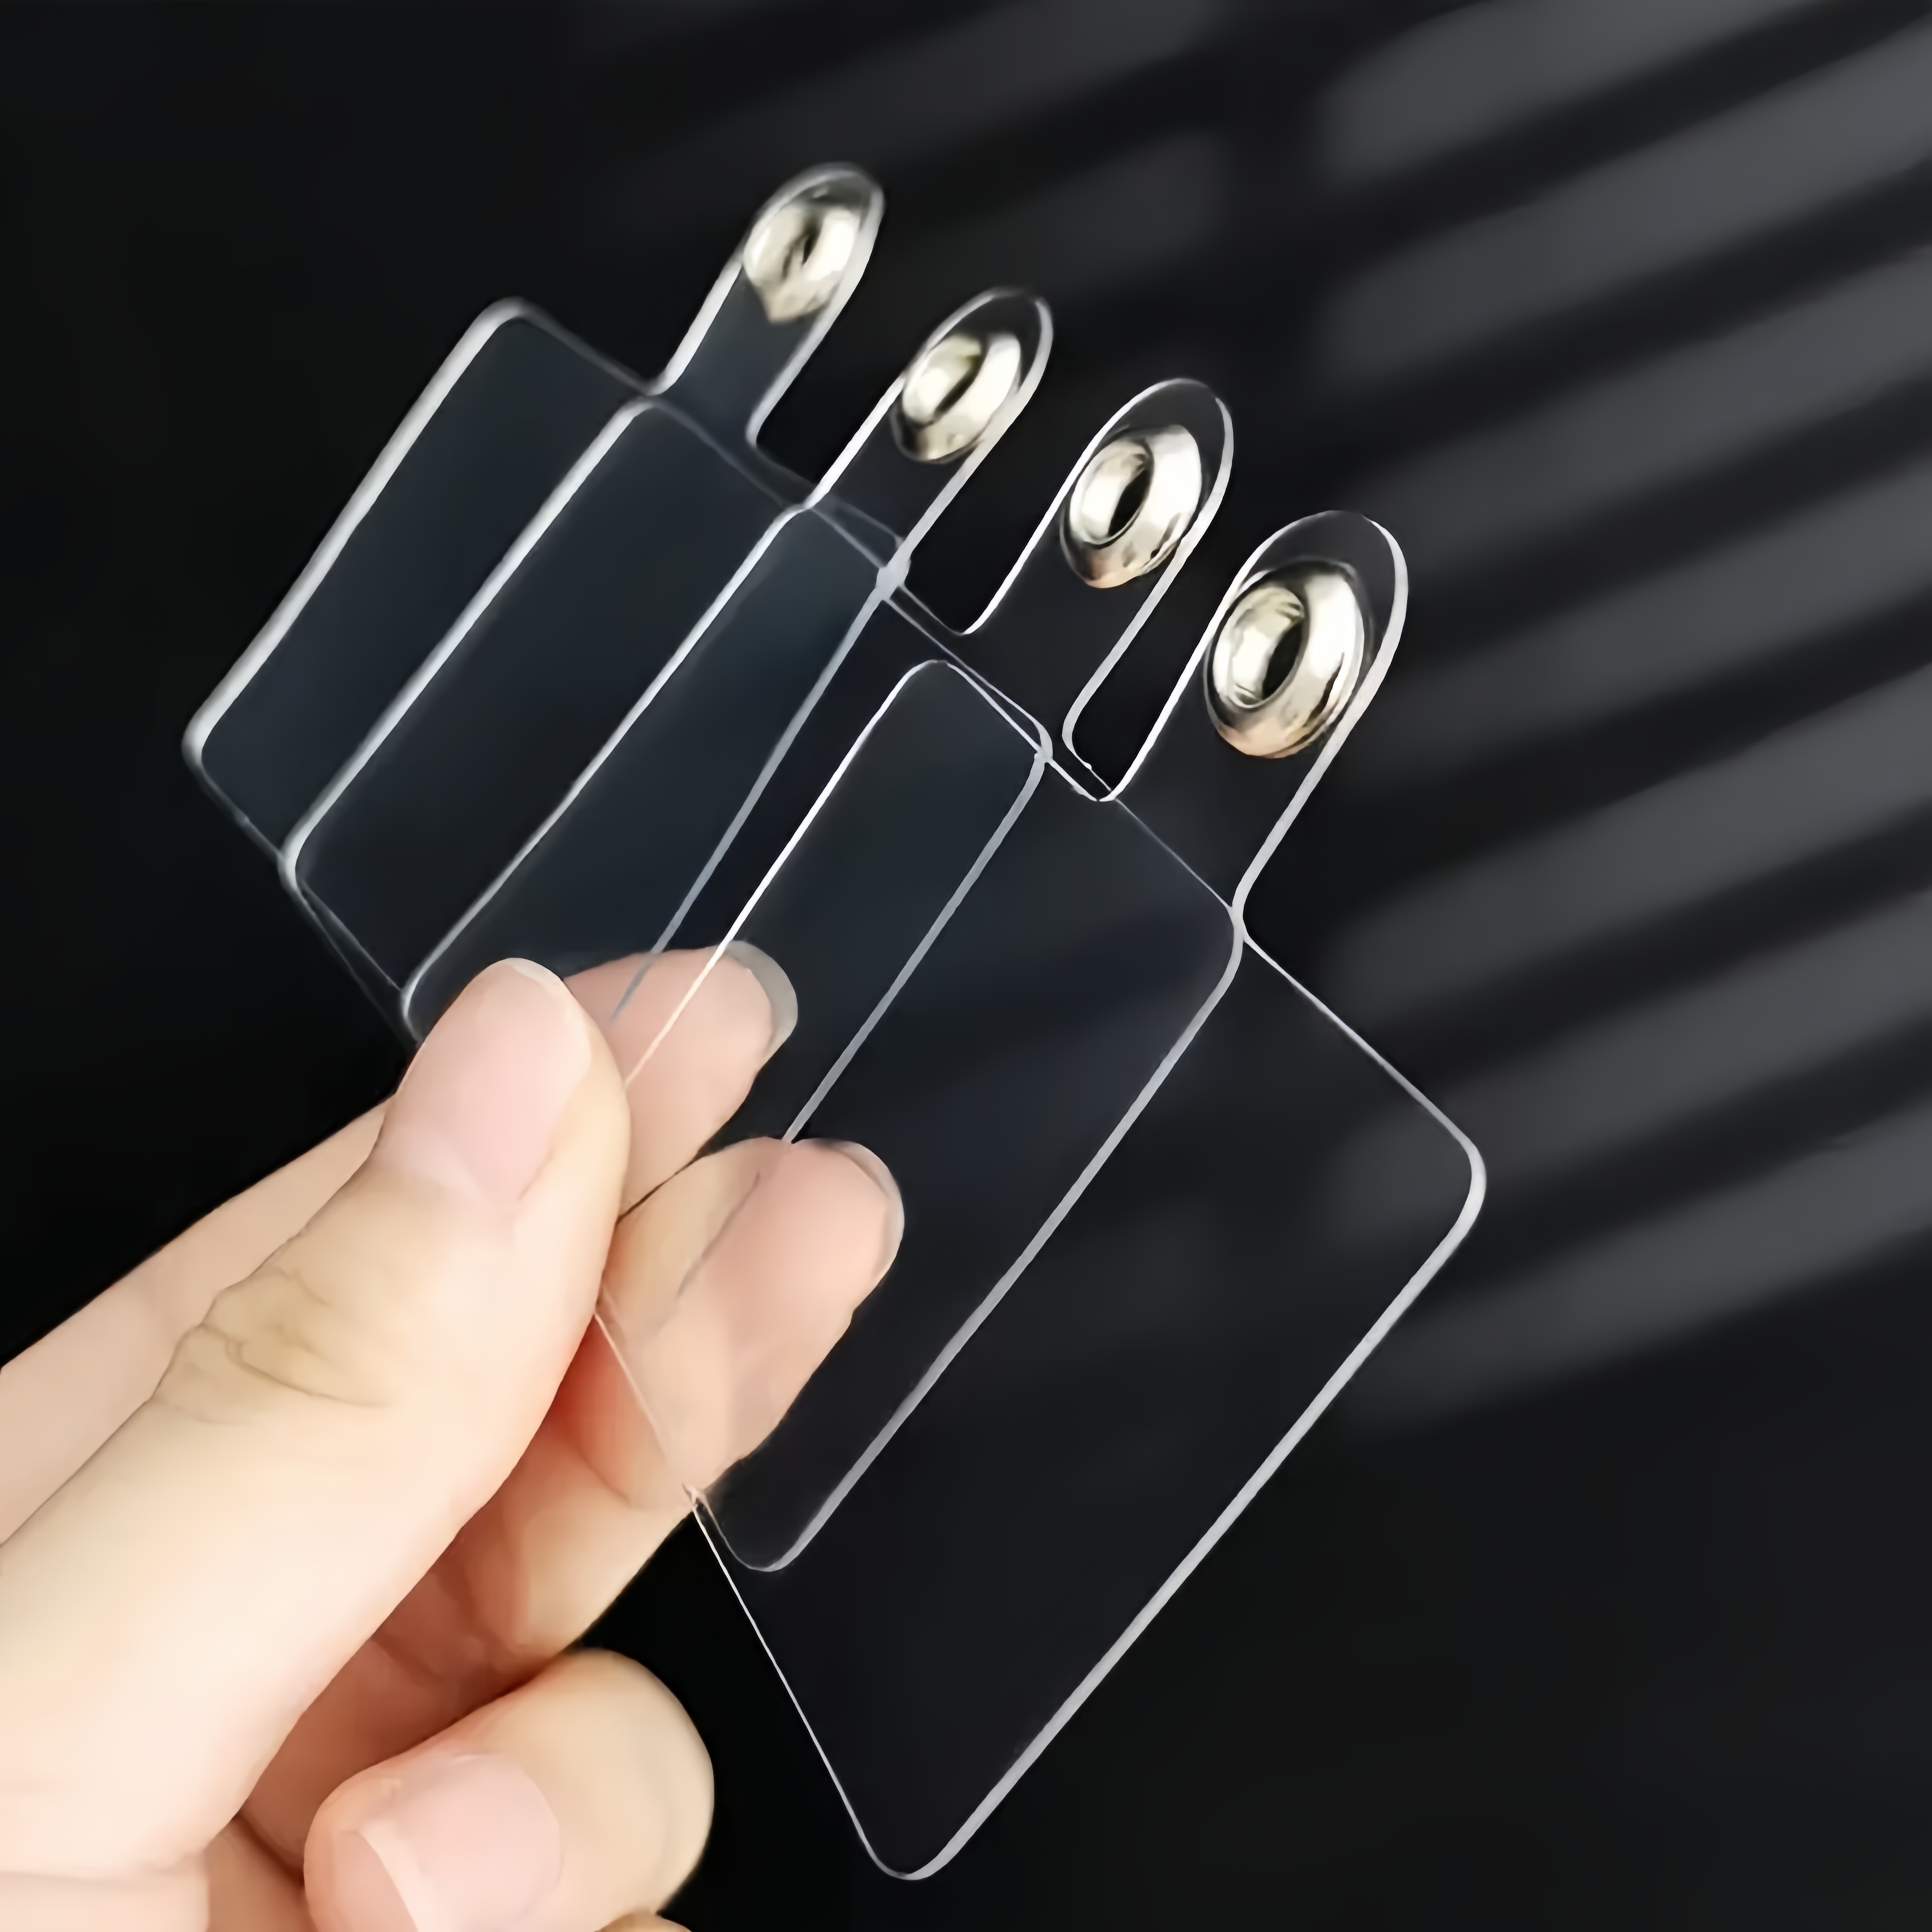 

Secure Your Smartphone With This Universal 4-pack Of Anti-theft Hook Card Cell Phone Lanyards!